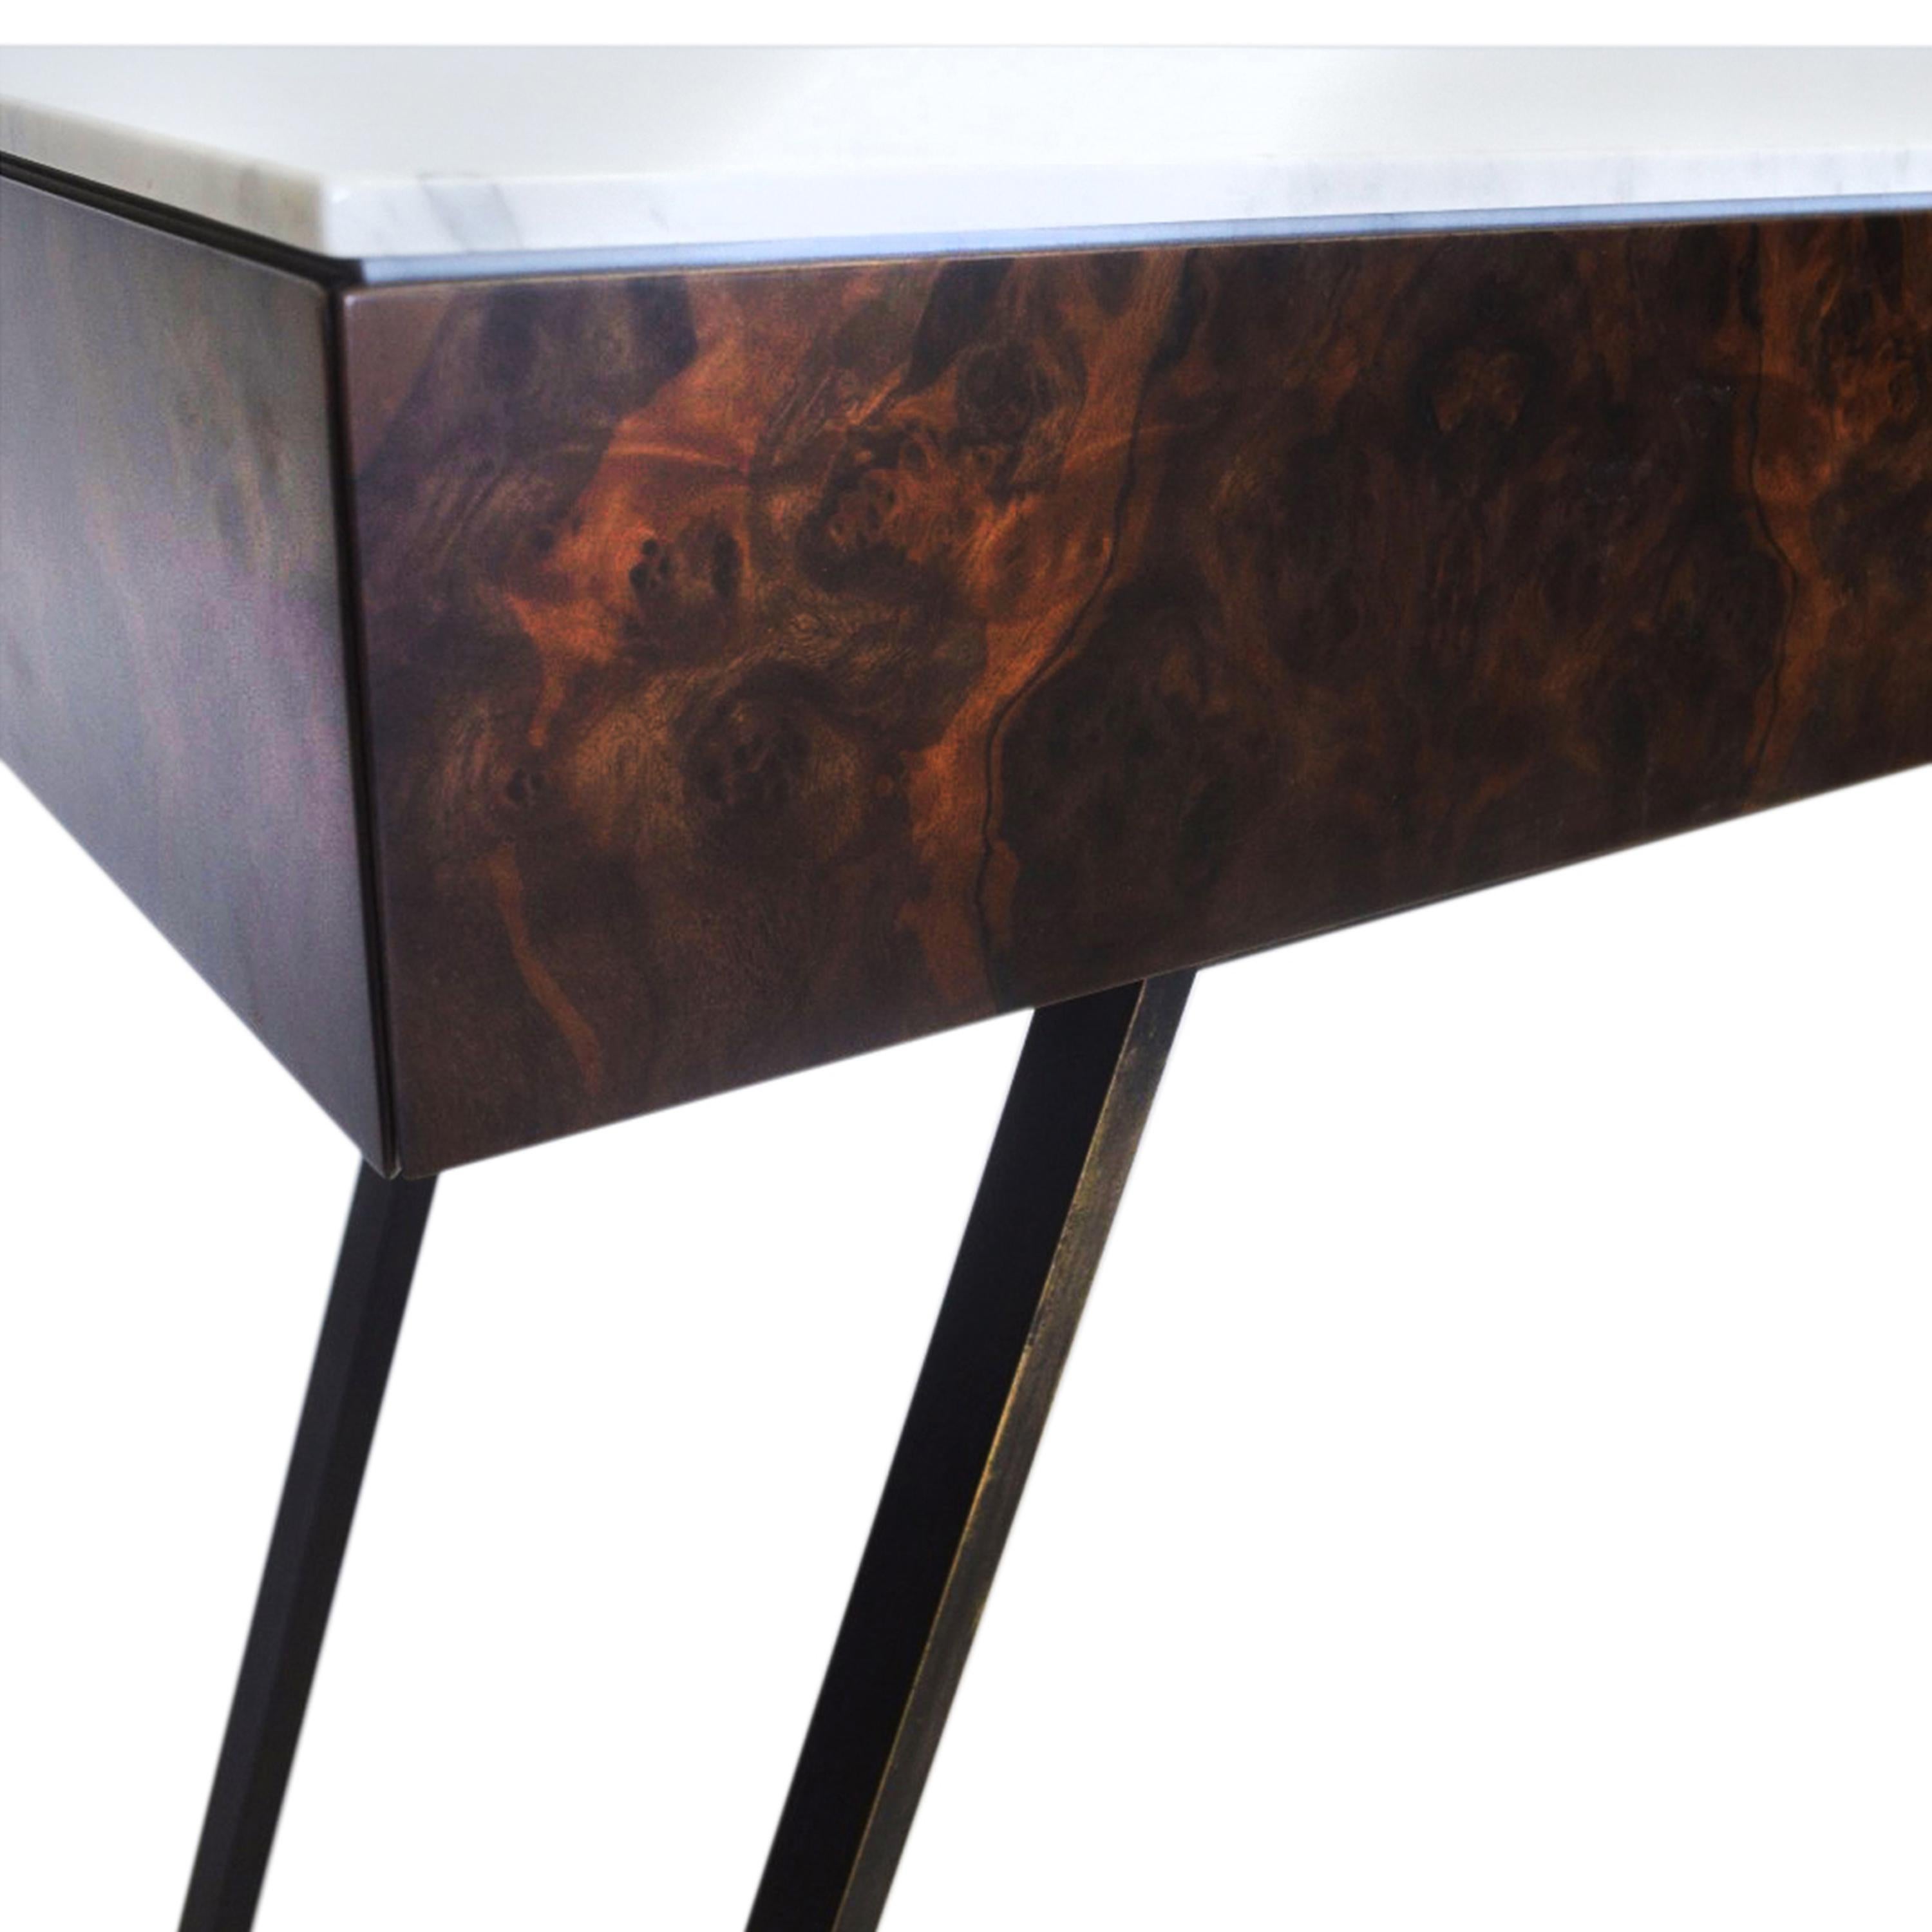 Ex-Display Marble, Burr Walnut Veneer And Metal Legs Console Table With Drawers In Good Condition For Sale In London, GB